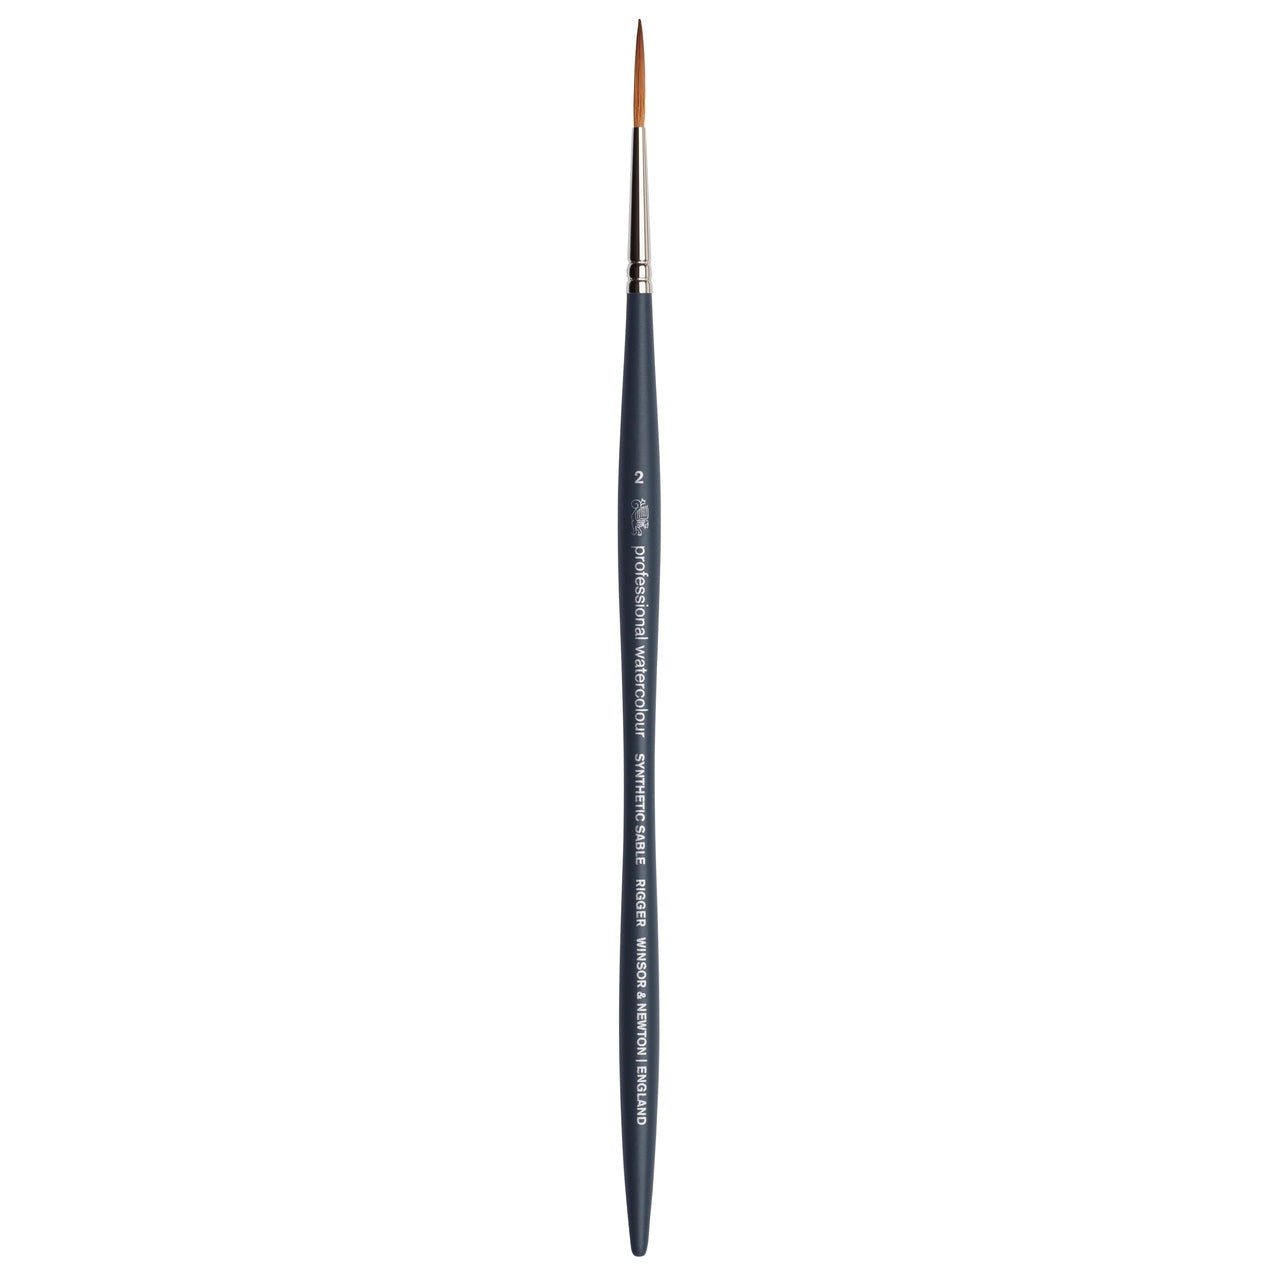 Winsor & Newton Professional Watercolor Synthetic Sable Brush - Rigger 2 - merriartist.com